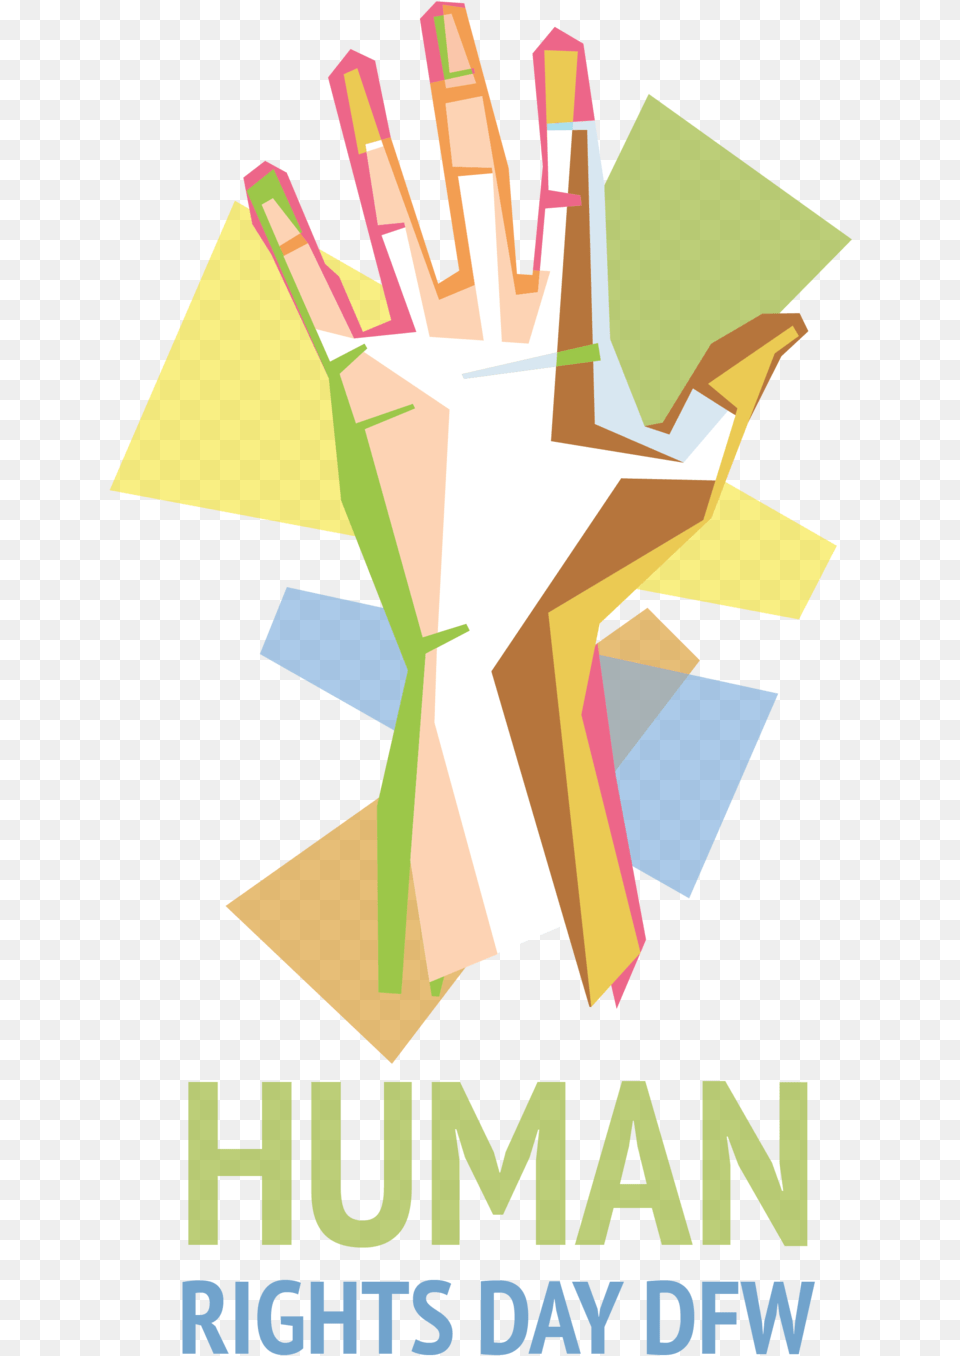 Human Rights Day Hands Up Illustration Human Rights, Advertisement, Poster, Art, Graphics Png Image